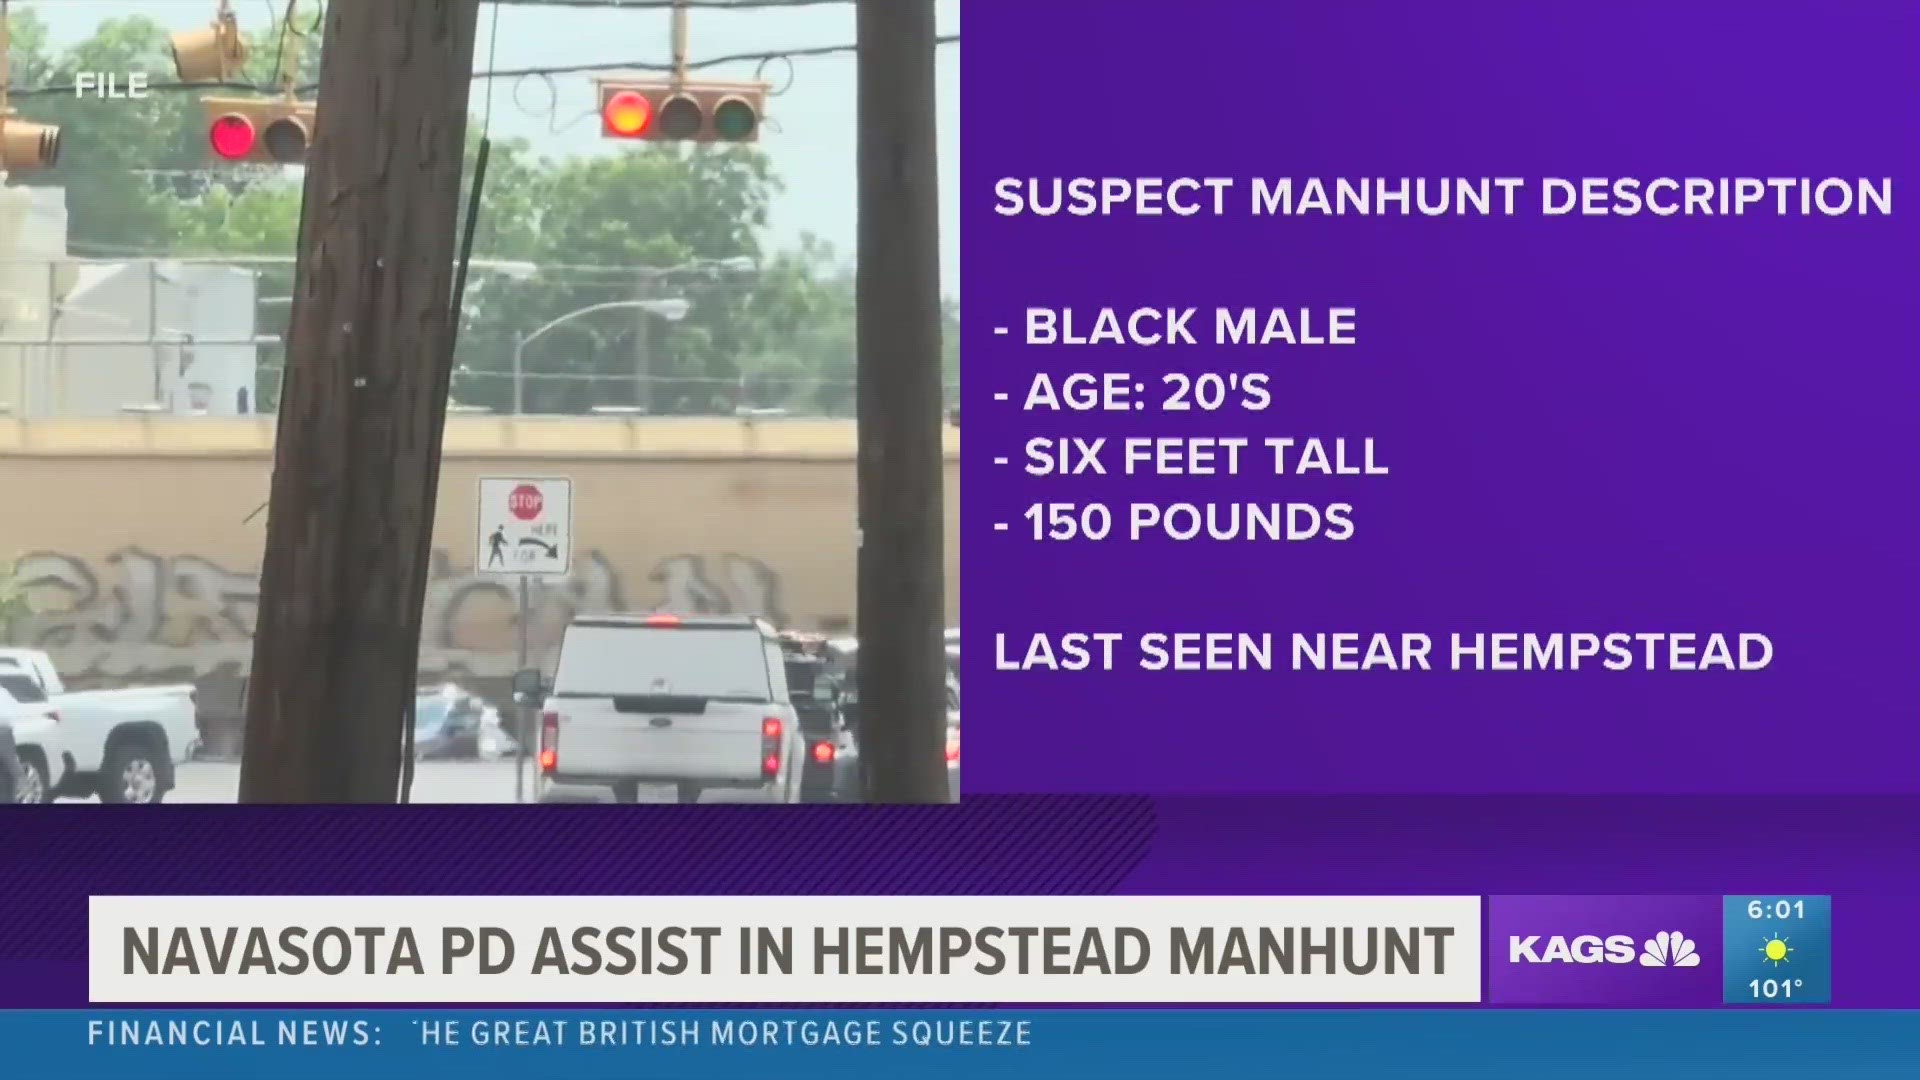 Police say multiple agencies are assisting with finding the suspect, who they say is considered armed and dangerous.